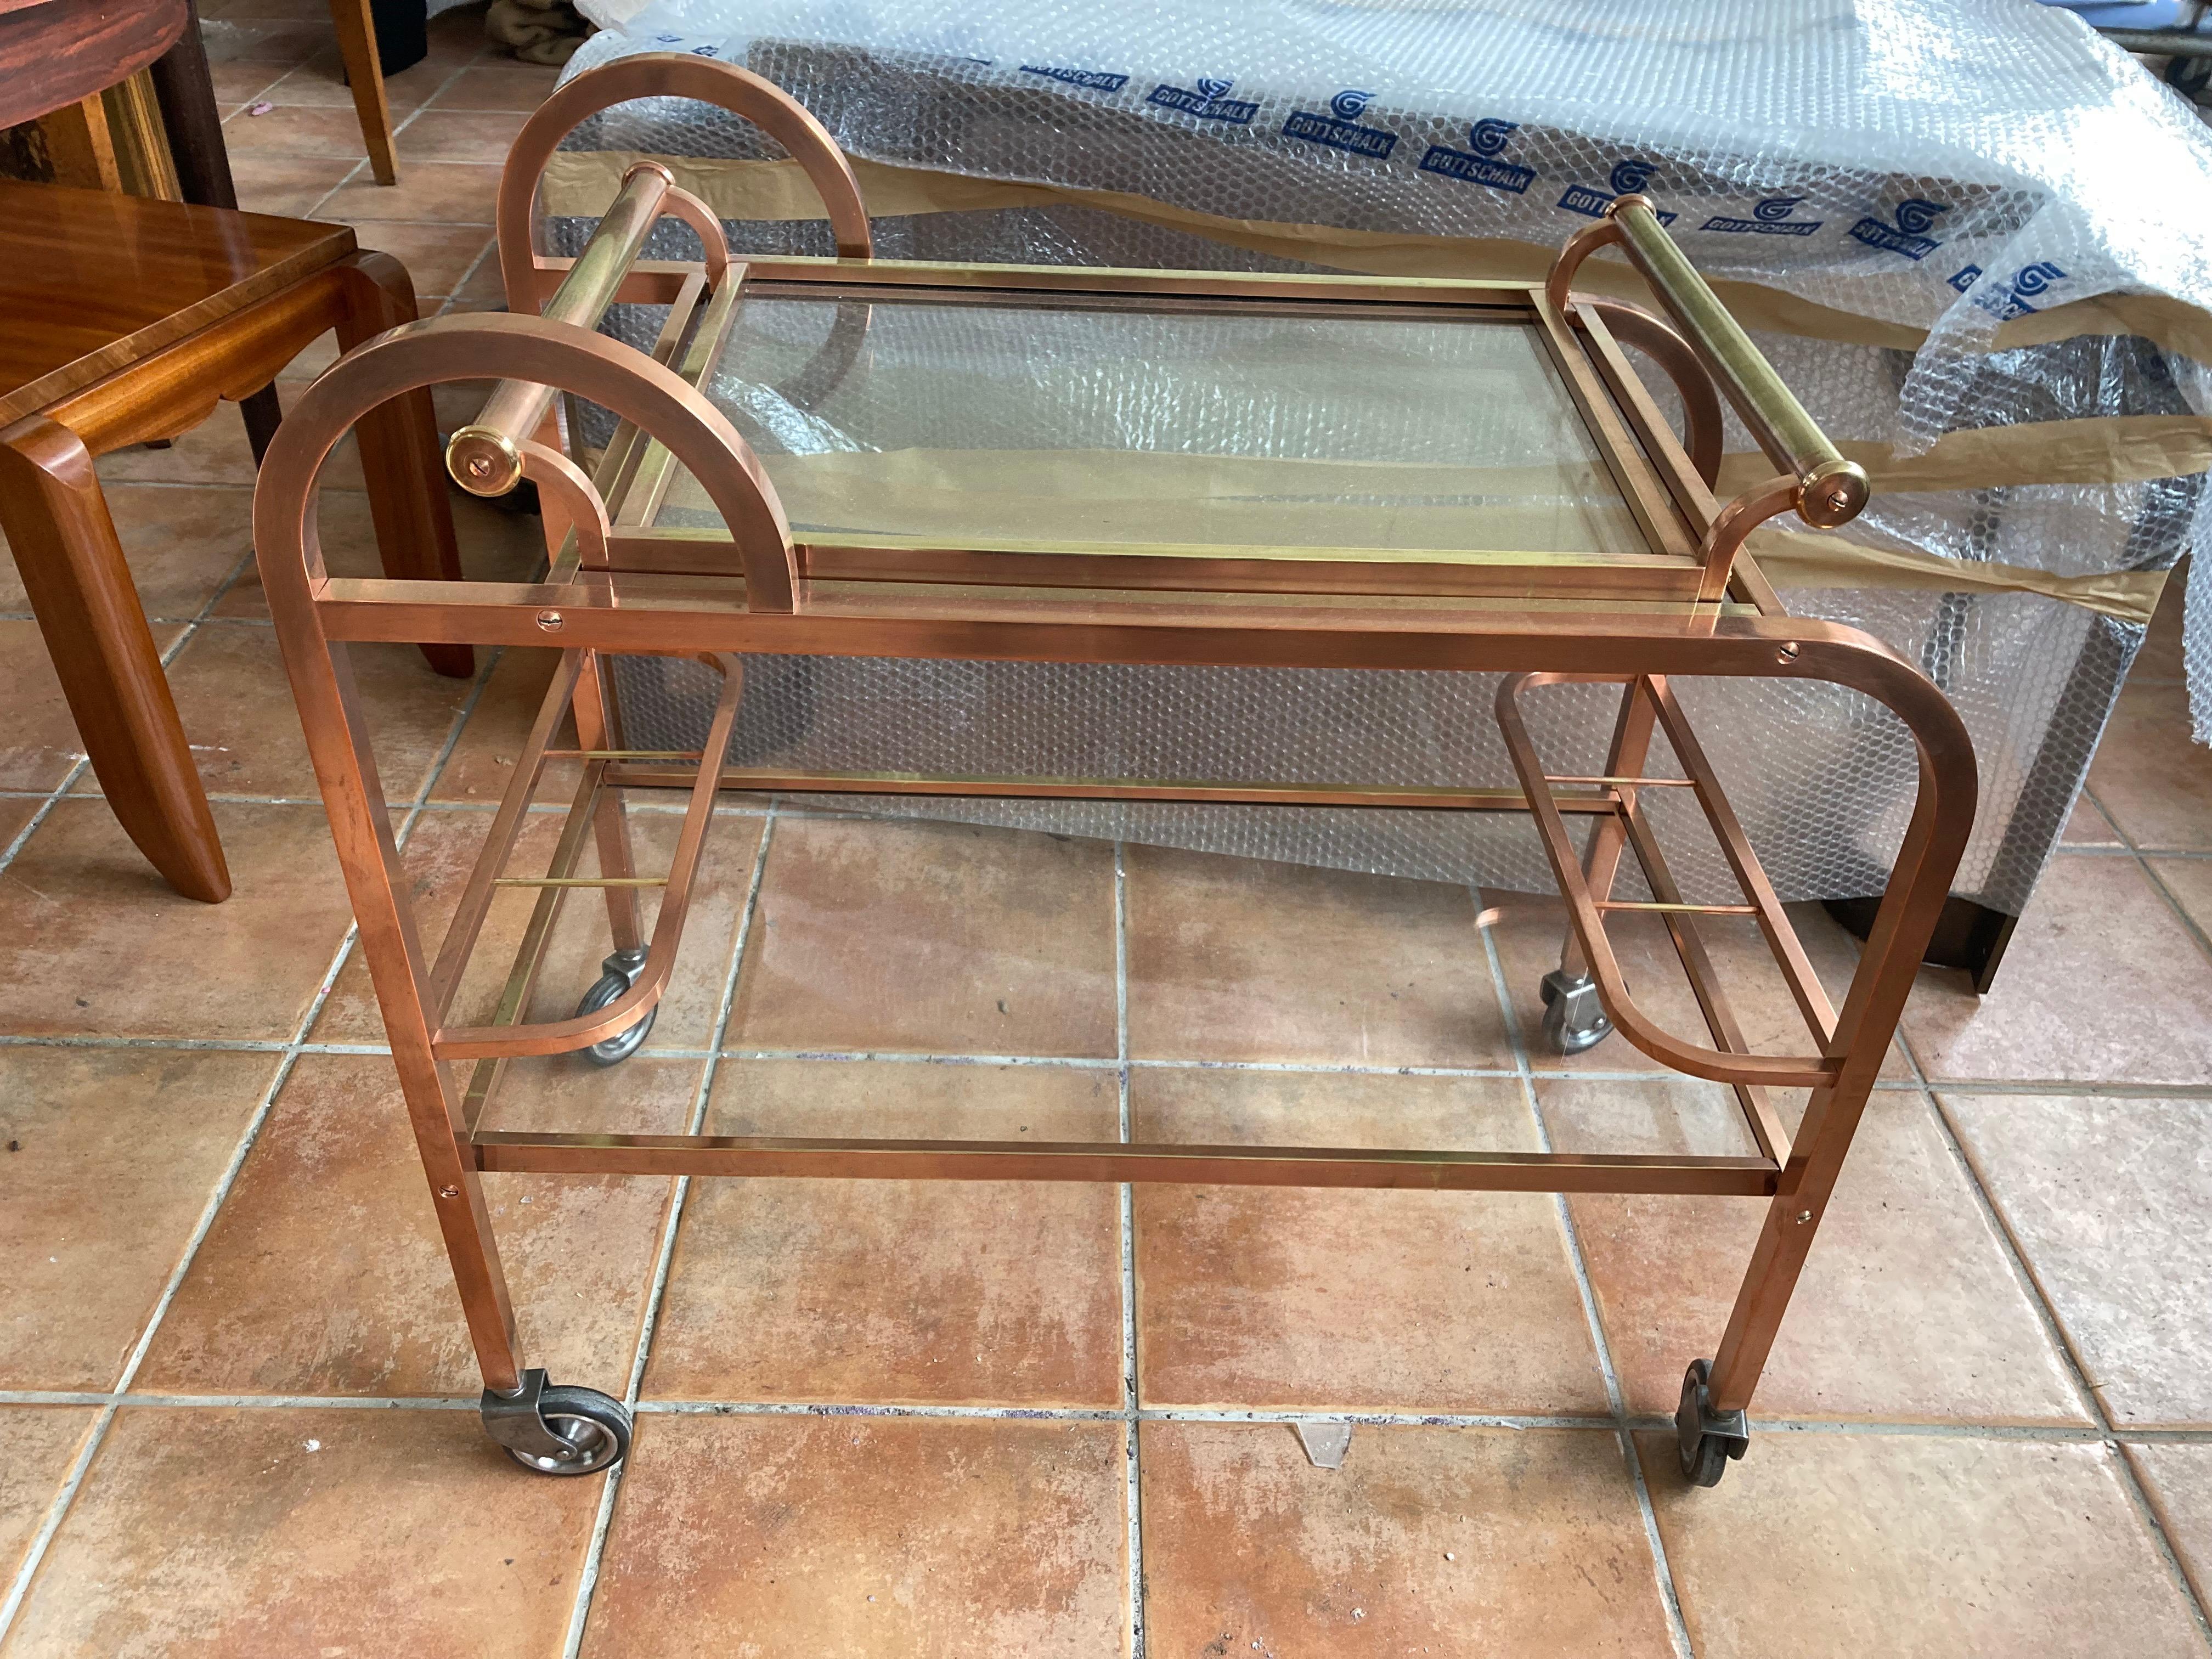 Elegant french Art Déco bar cart of the twenties.
Square tube, removable tray, glass shelves.
The bar trolley has a rare copper and brass alloy.
Heavy solid quality, the bar cart has been professionally polished.